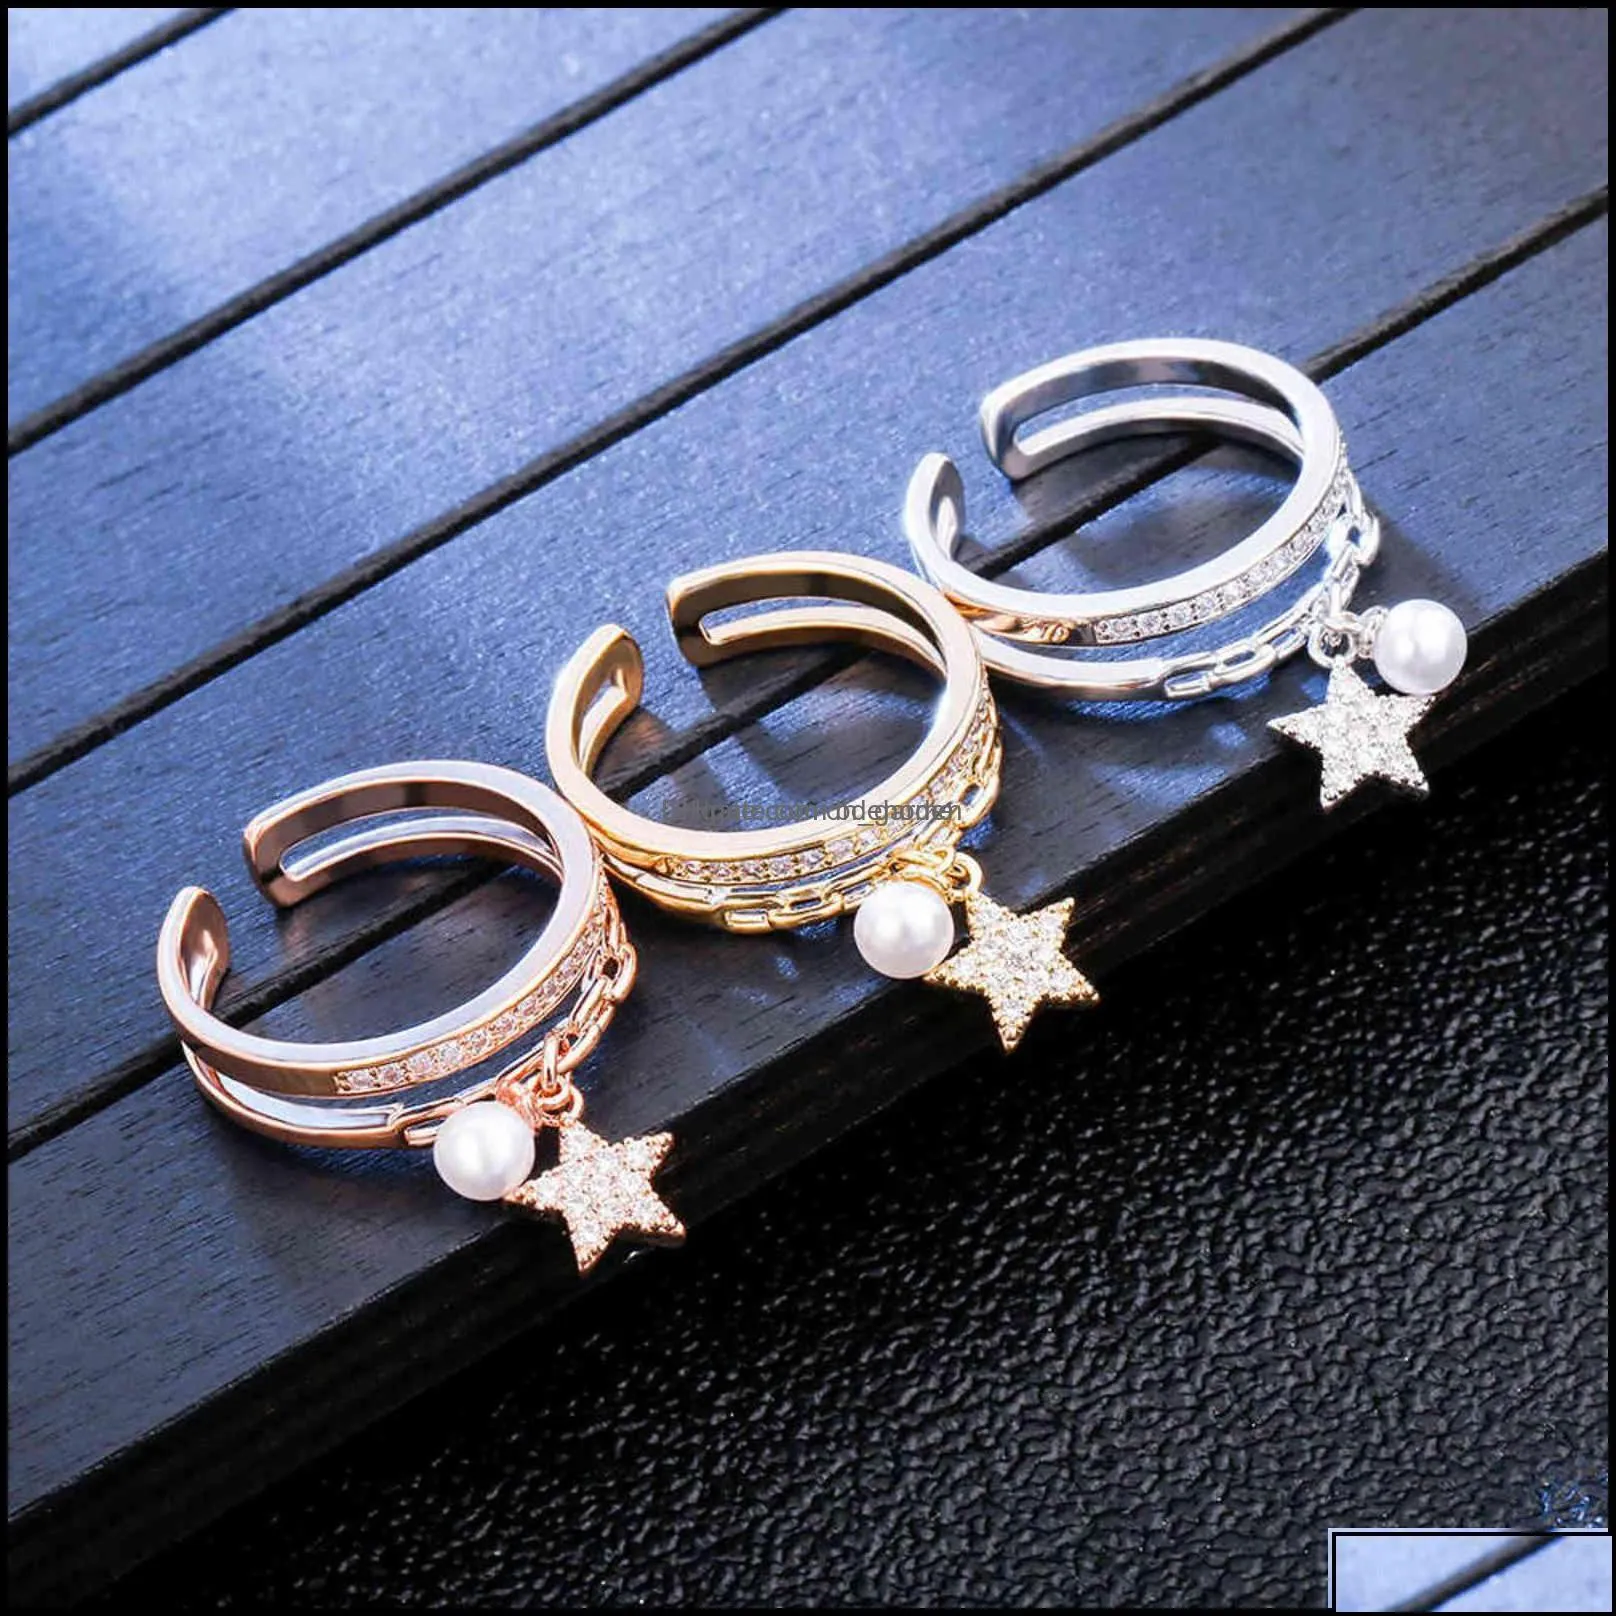 band rings jewelry gold sier color ring for women classic adjustable size plus imitation pearl cz star pendant elegant aessories 2021 drop